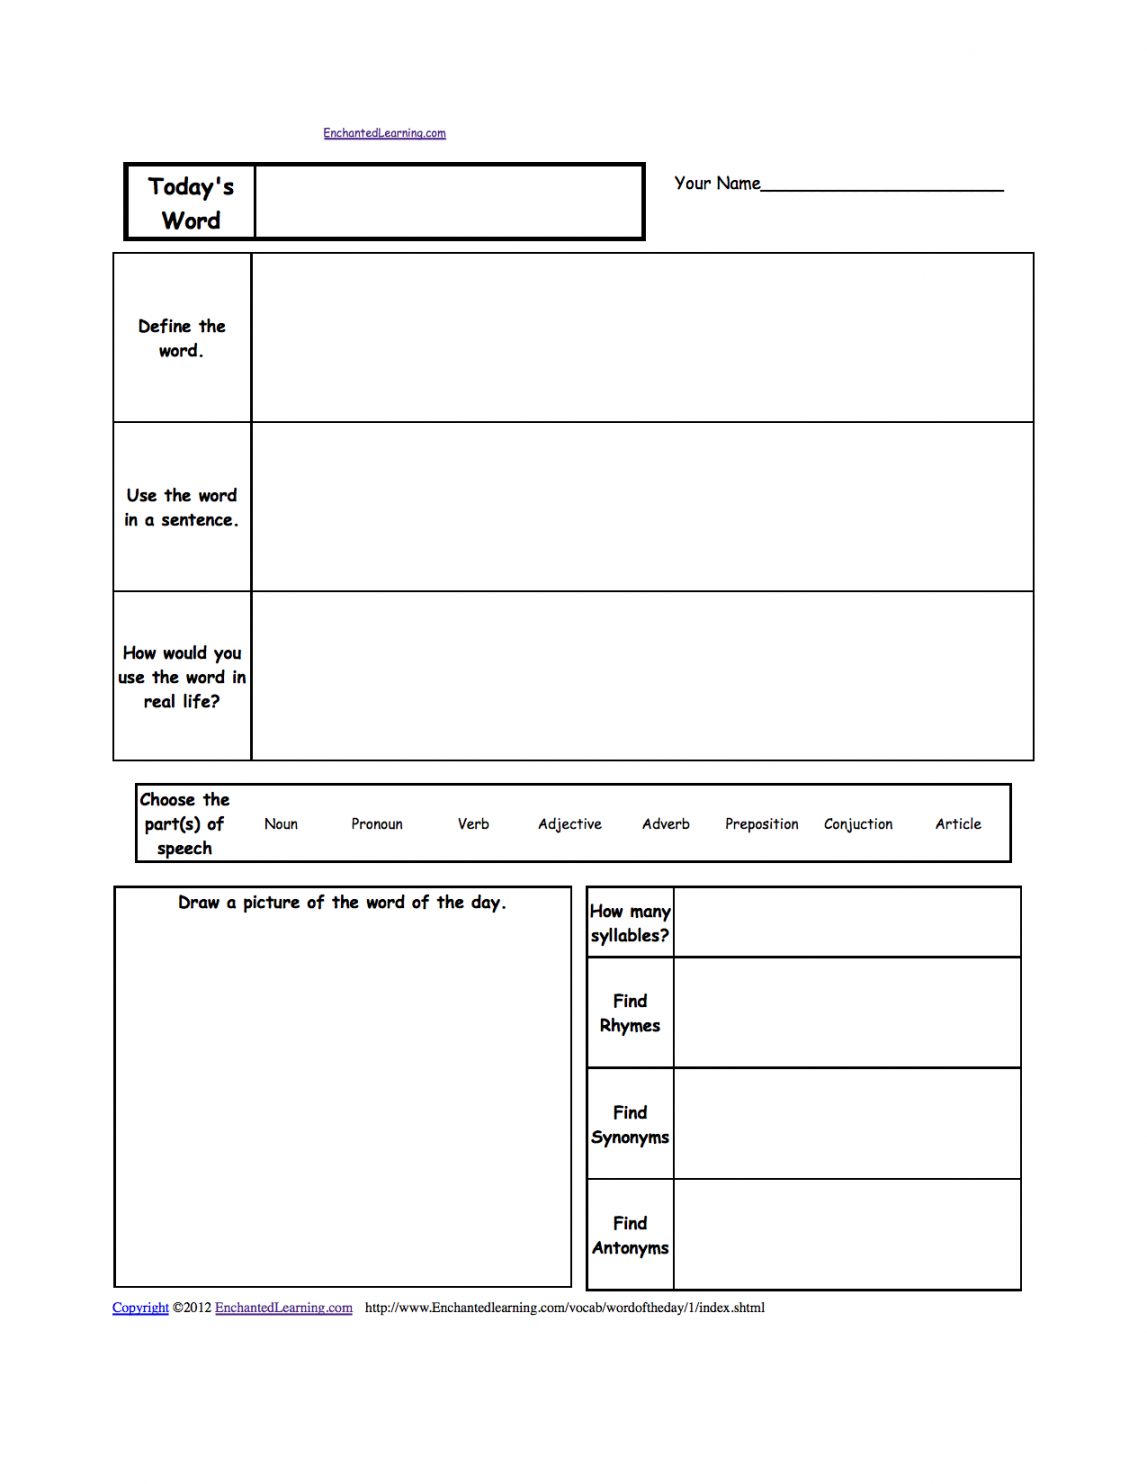 Word of the Day Worksheets - EnchantedLearning